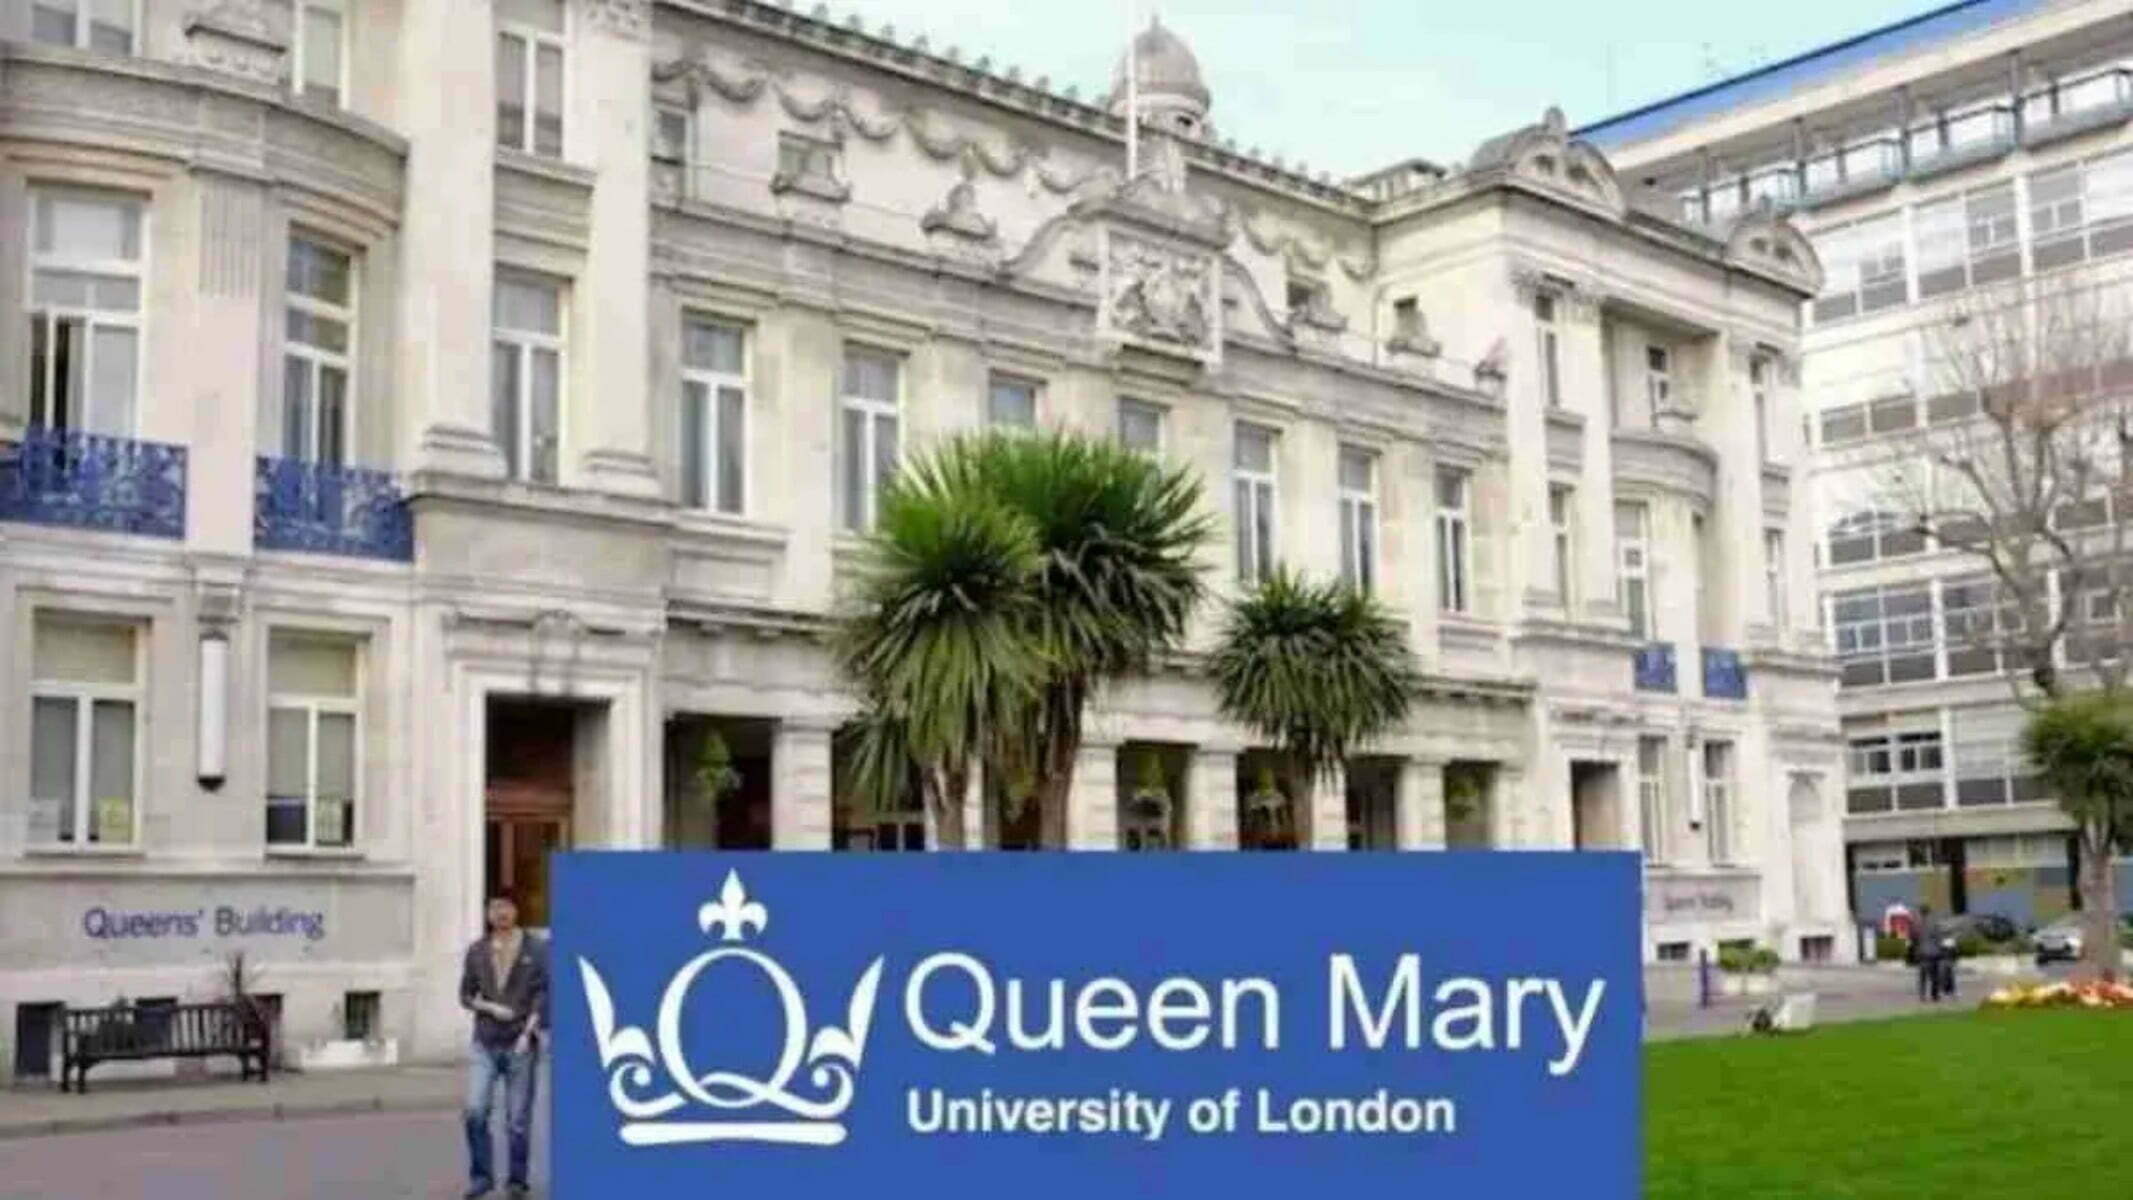 DeepMind Scholarships 2022 at Queen Mary University of London in UK